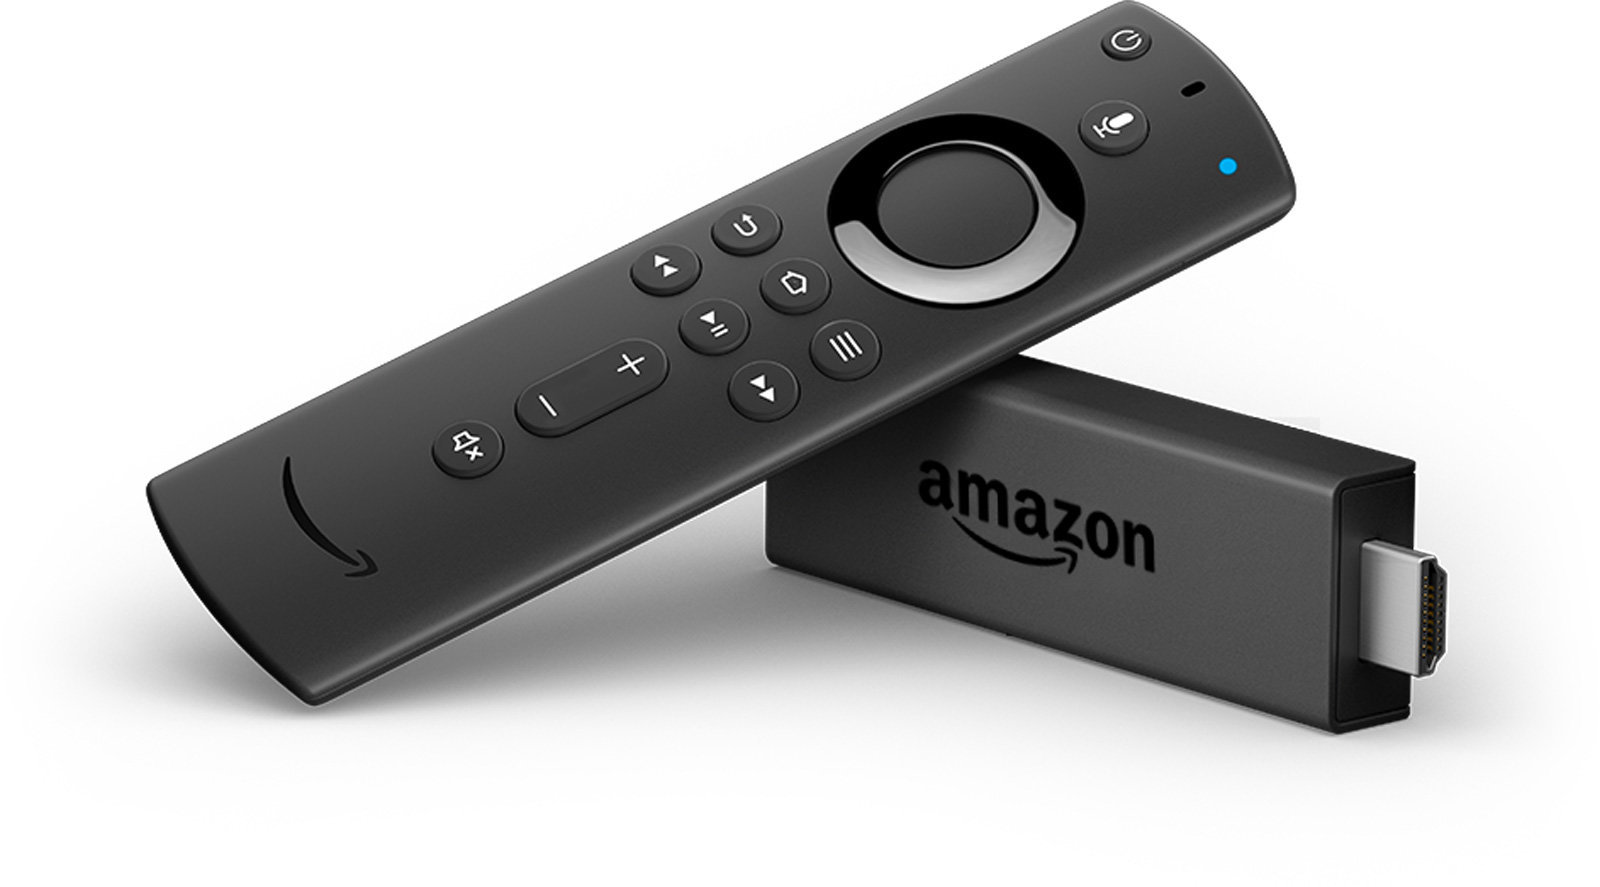 Amazon’s base Fire TV Stick now comes with its new Alexa remote